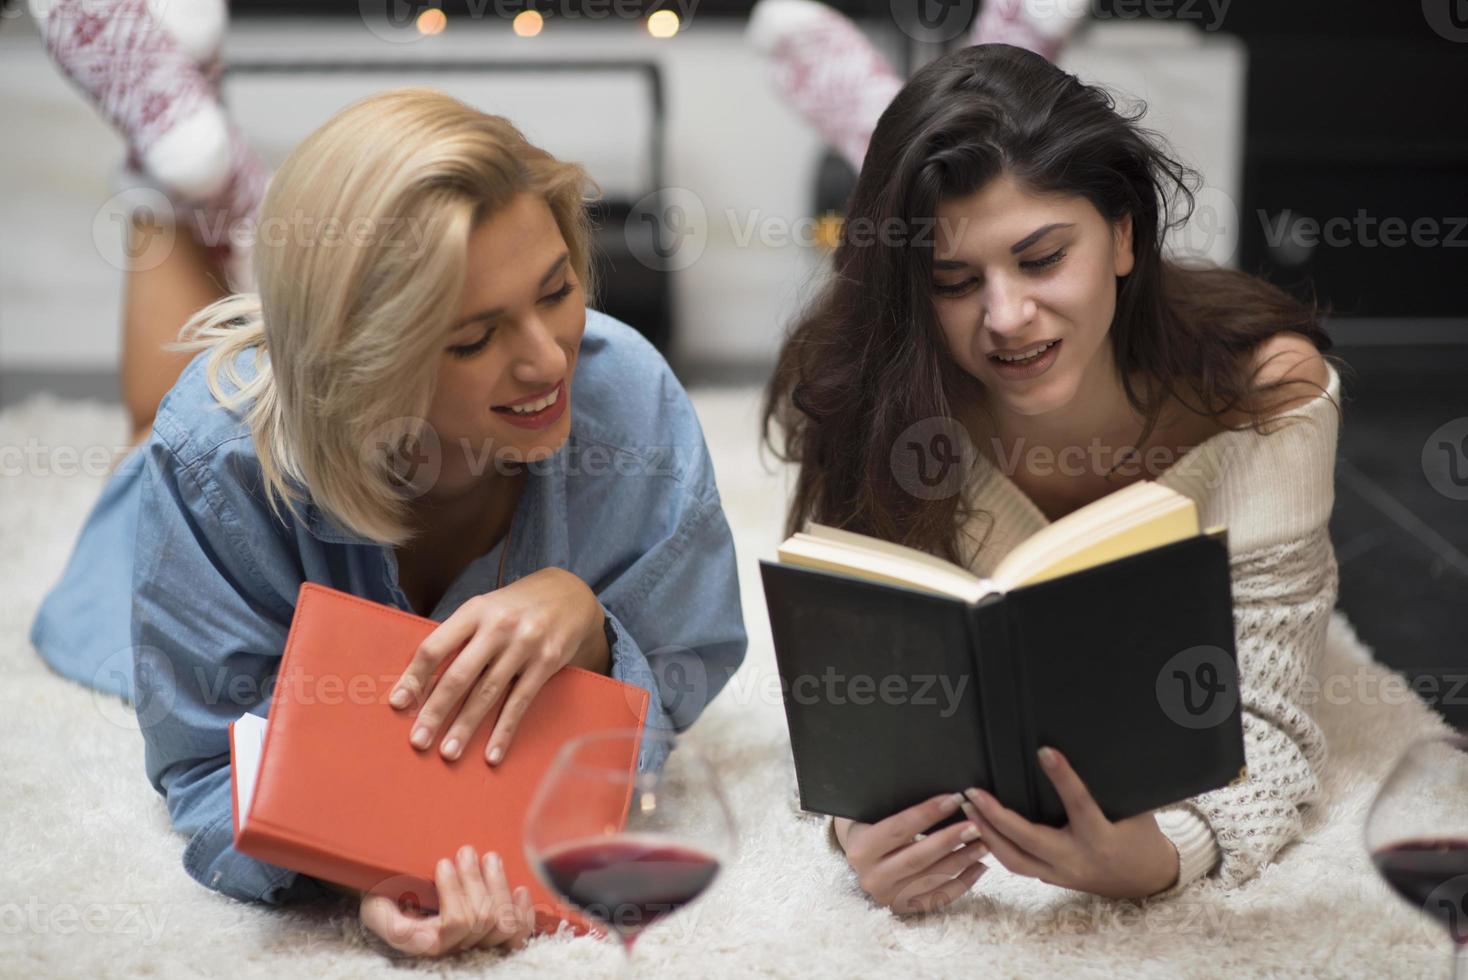 two female friends reading a book and drinking red wine by a fire place. life stile concept. photo